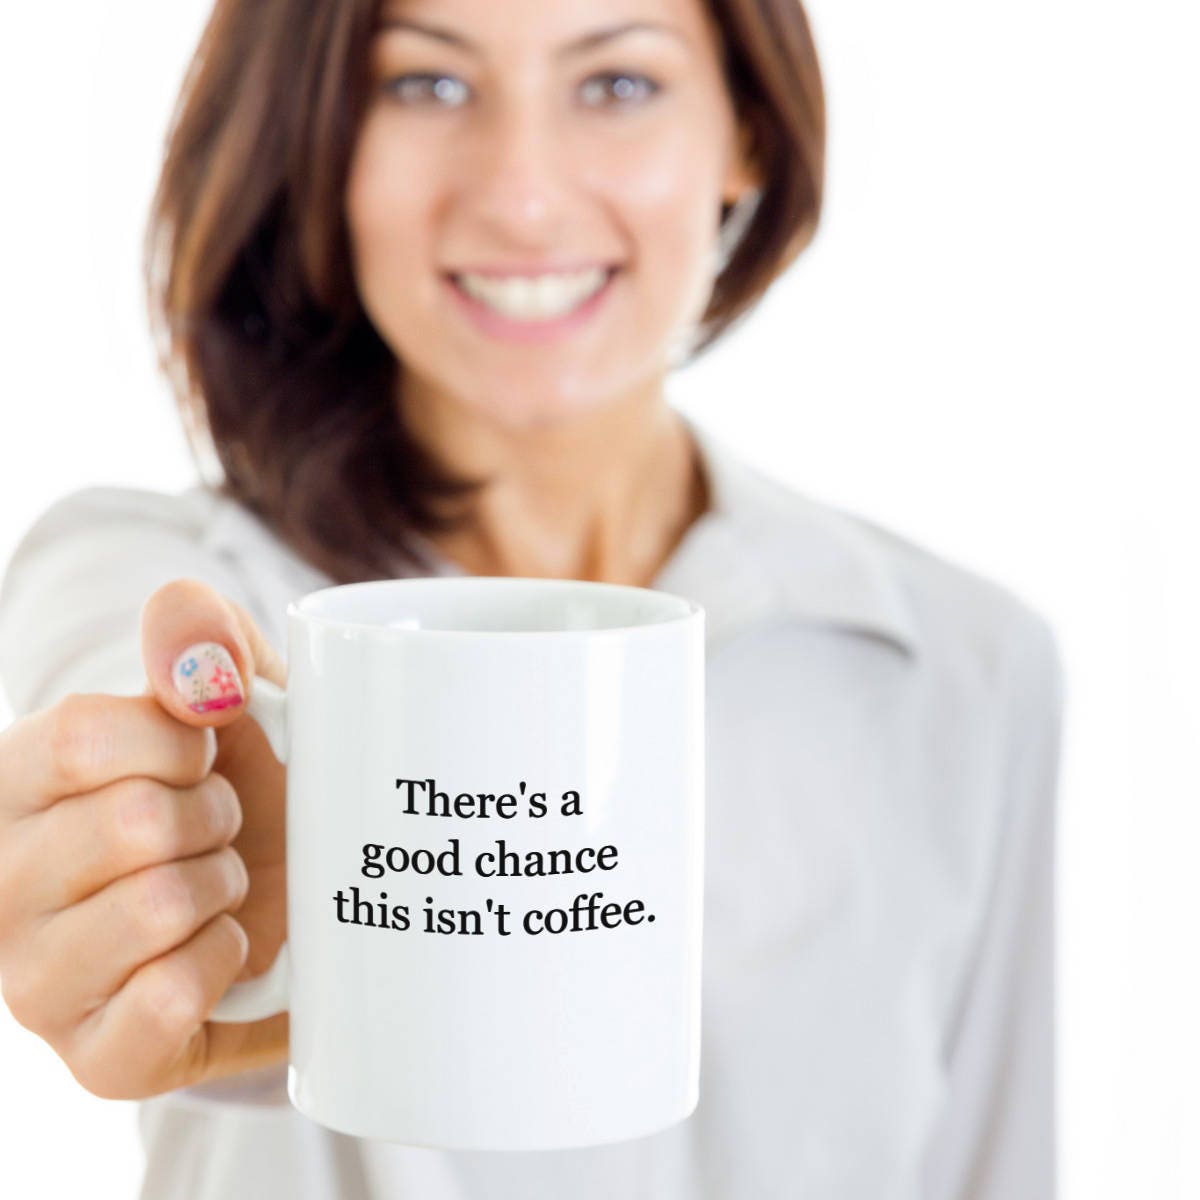 Day Drinking From A Mug to Keep Things Professional Funny Office Gift for  Men Women Work Coffee Cup Gag Gift Exchange Gifts for Drinkers 